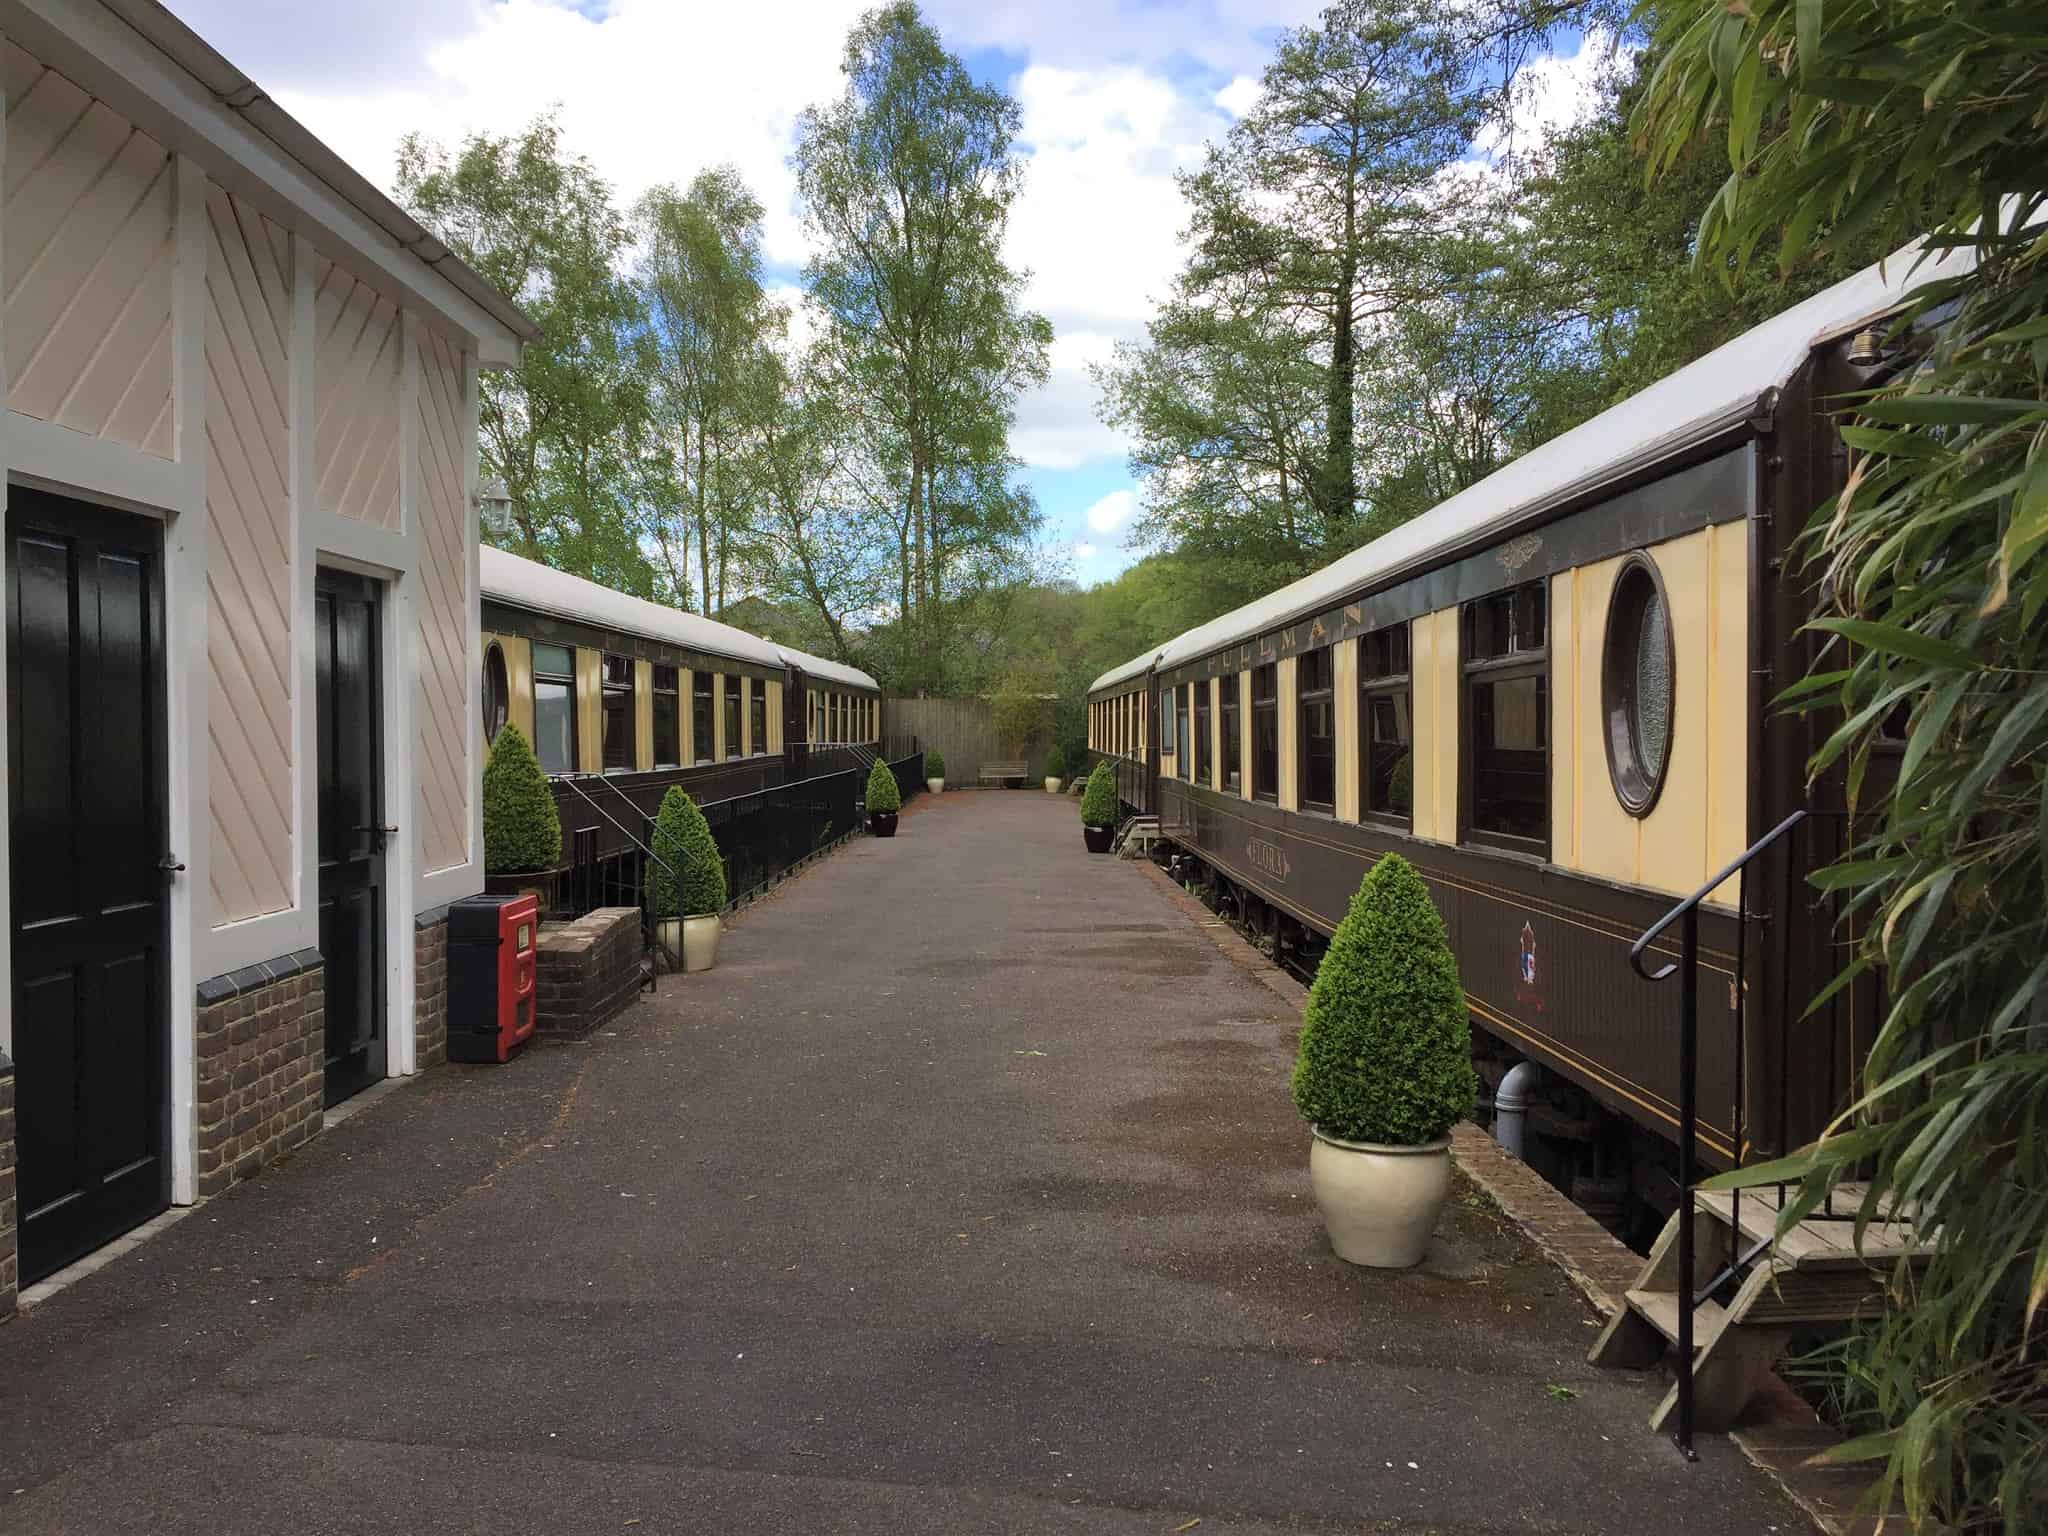 The Old Railway Station’s romantic Pullman carriages